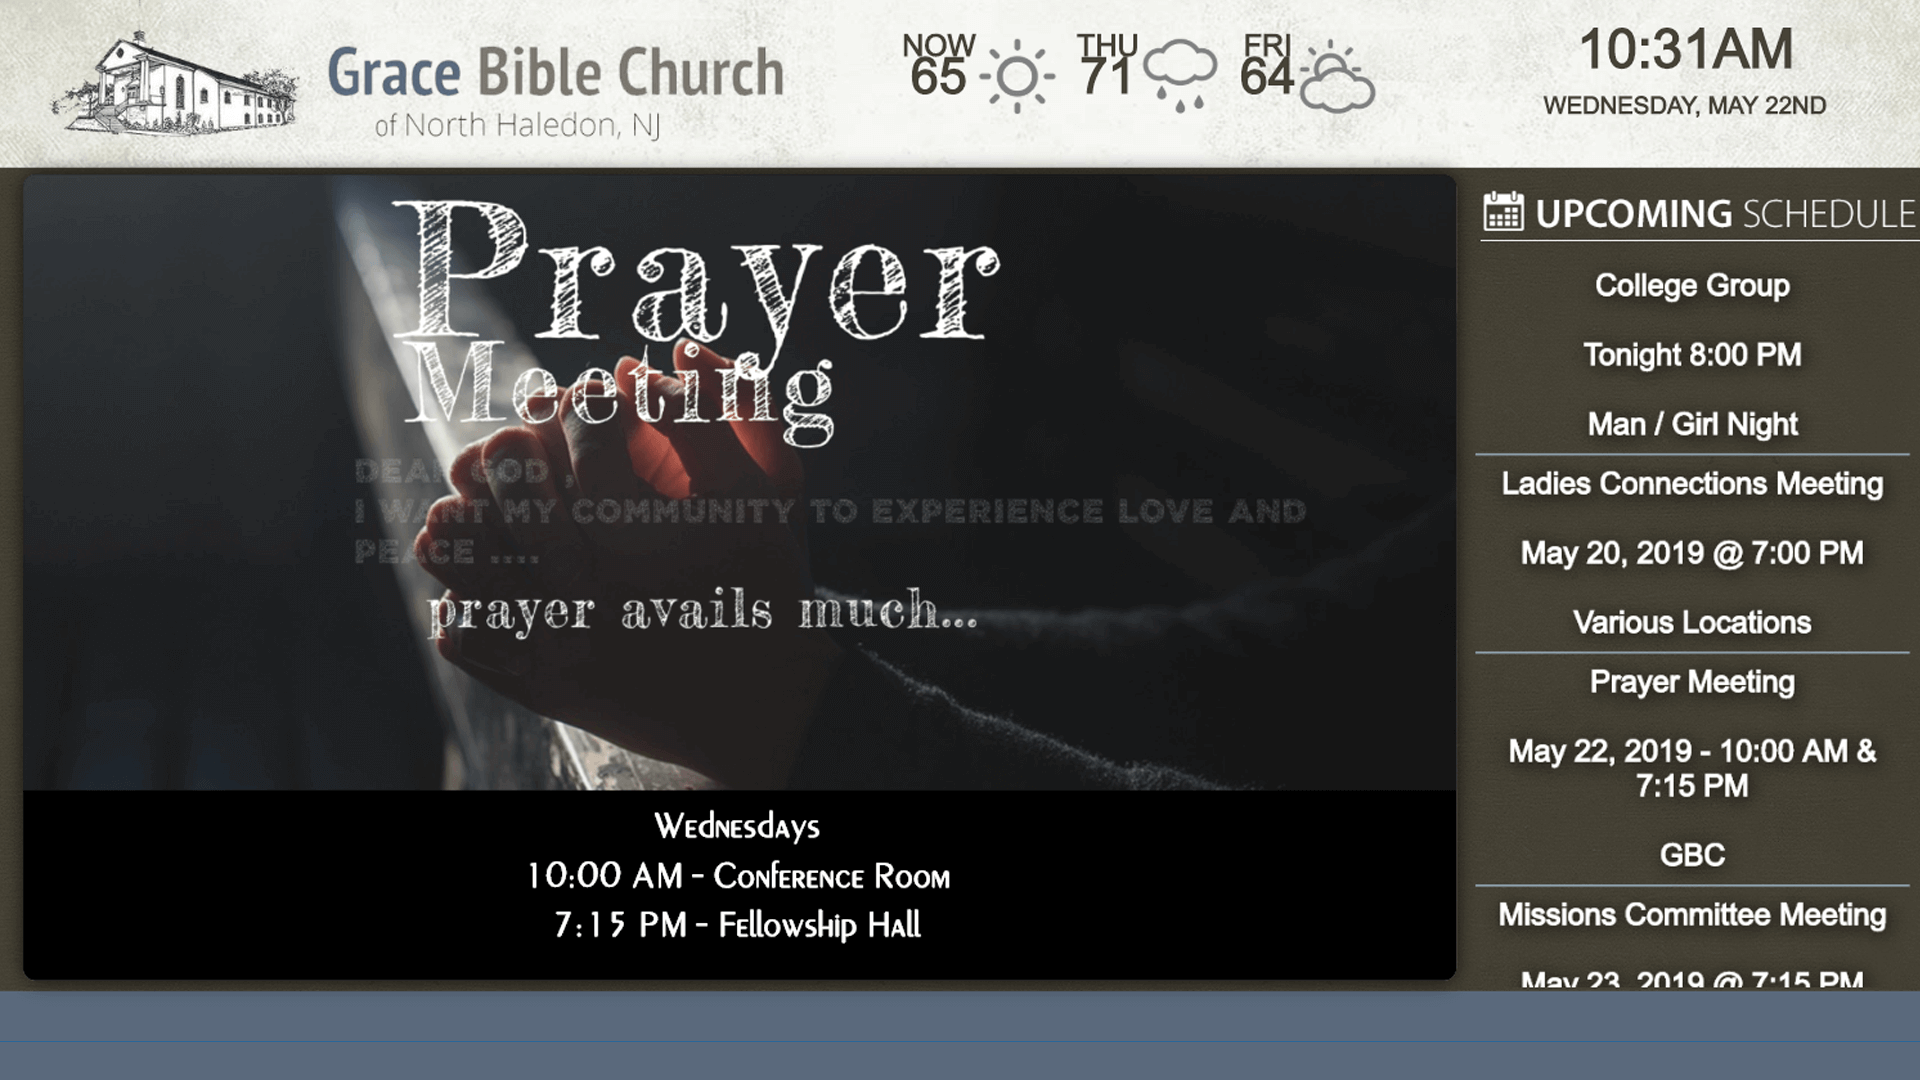 Simple digital signage with schedules, meeting info, and weather info for Grace Bible Church